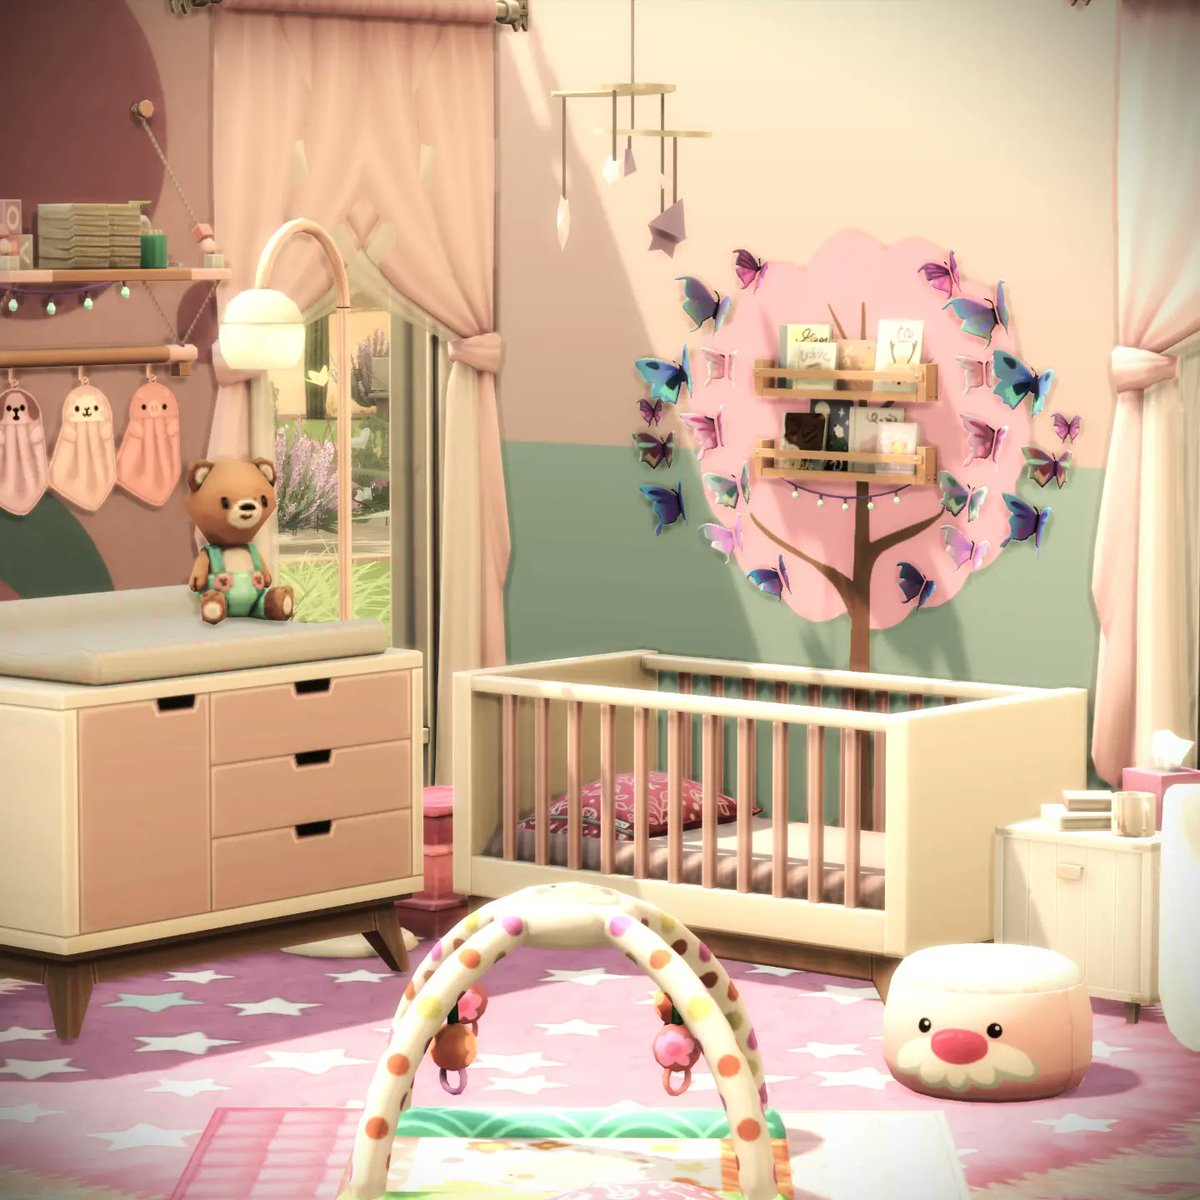 Sul sul🌼... this is the 4th Day of the awesome #9daysroomchallenge by the great @axiisims. 💝 I'd build an infant room for a little girl. Hope u like it!🌼 Thank you for beeing a part of this! 🌺Download in my Gallery. EA ID #Juliee86 #sims #ts4 #sims4 #ShowUsYourBuilds